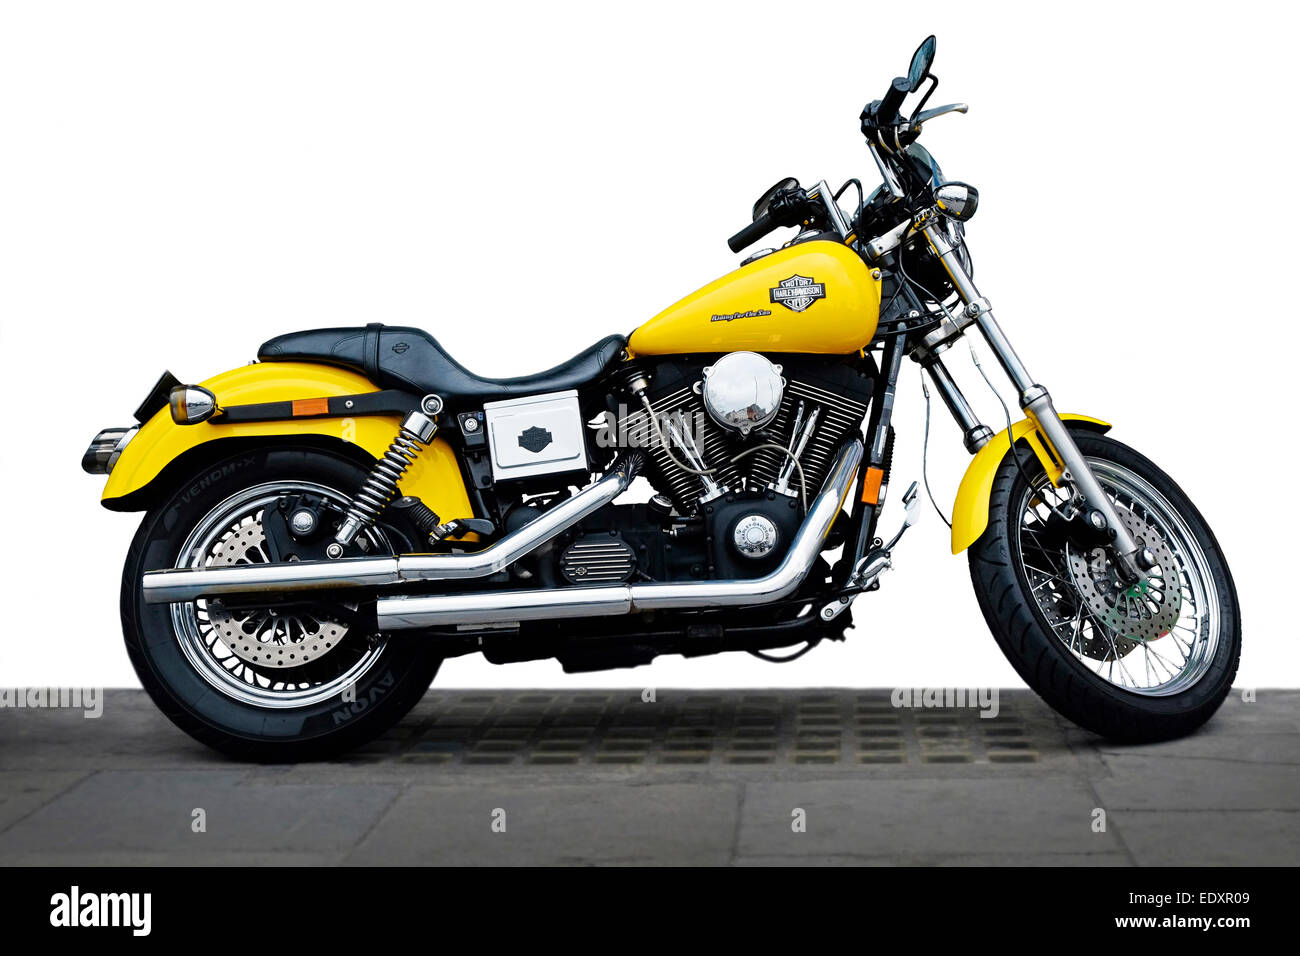 Harley Davidson Cruiser 1200 cc Motorcycle partial Cut out Yellow and chrome, Dublin street Stock Photo